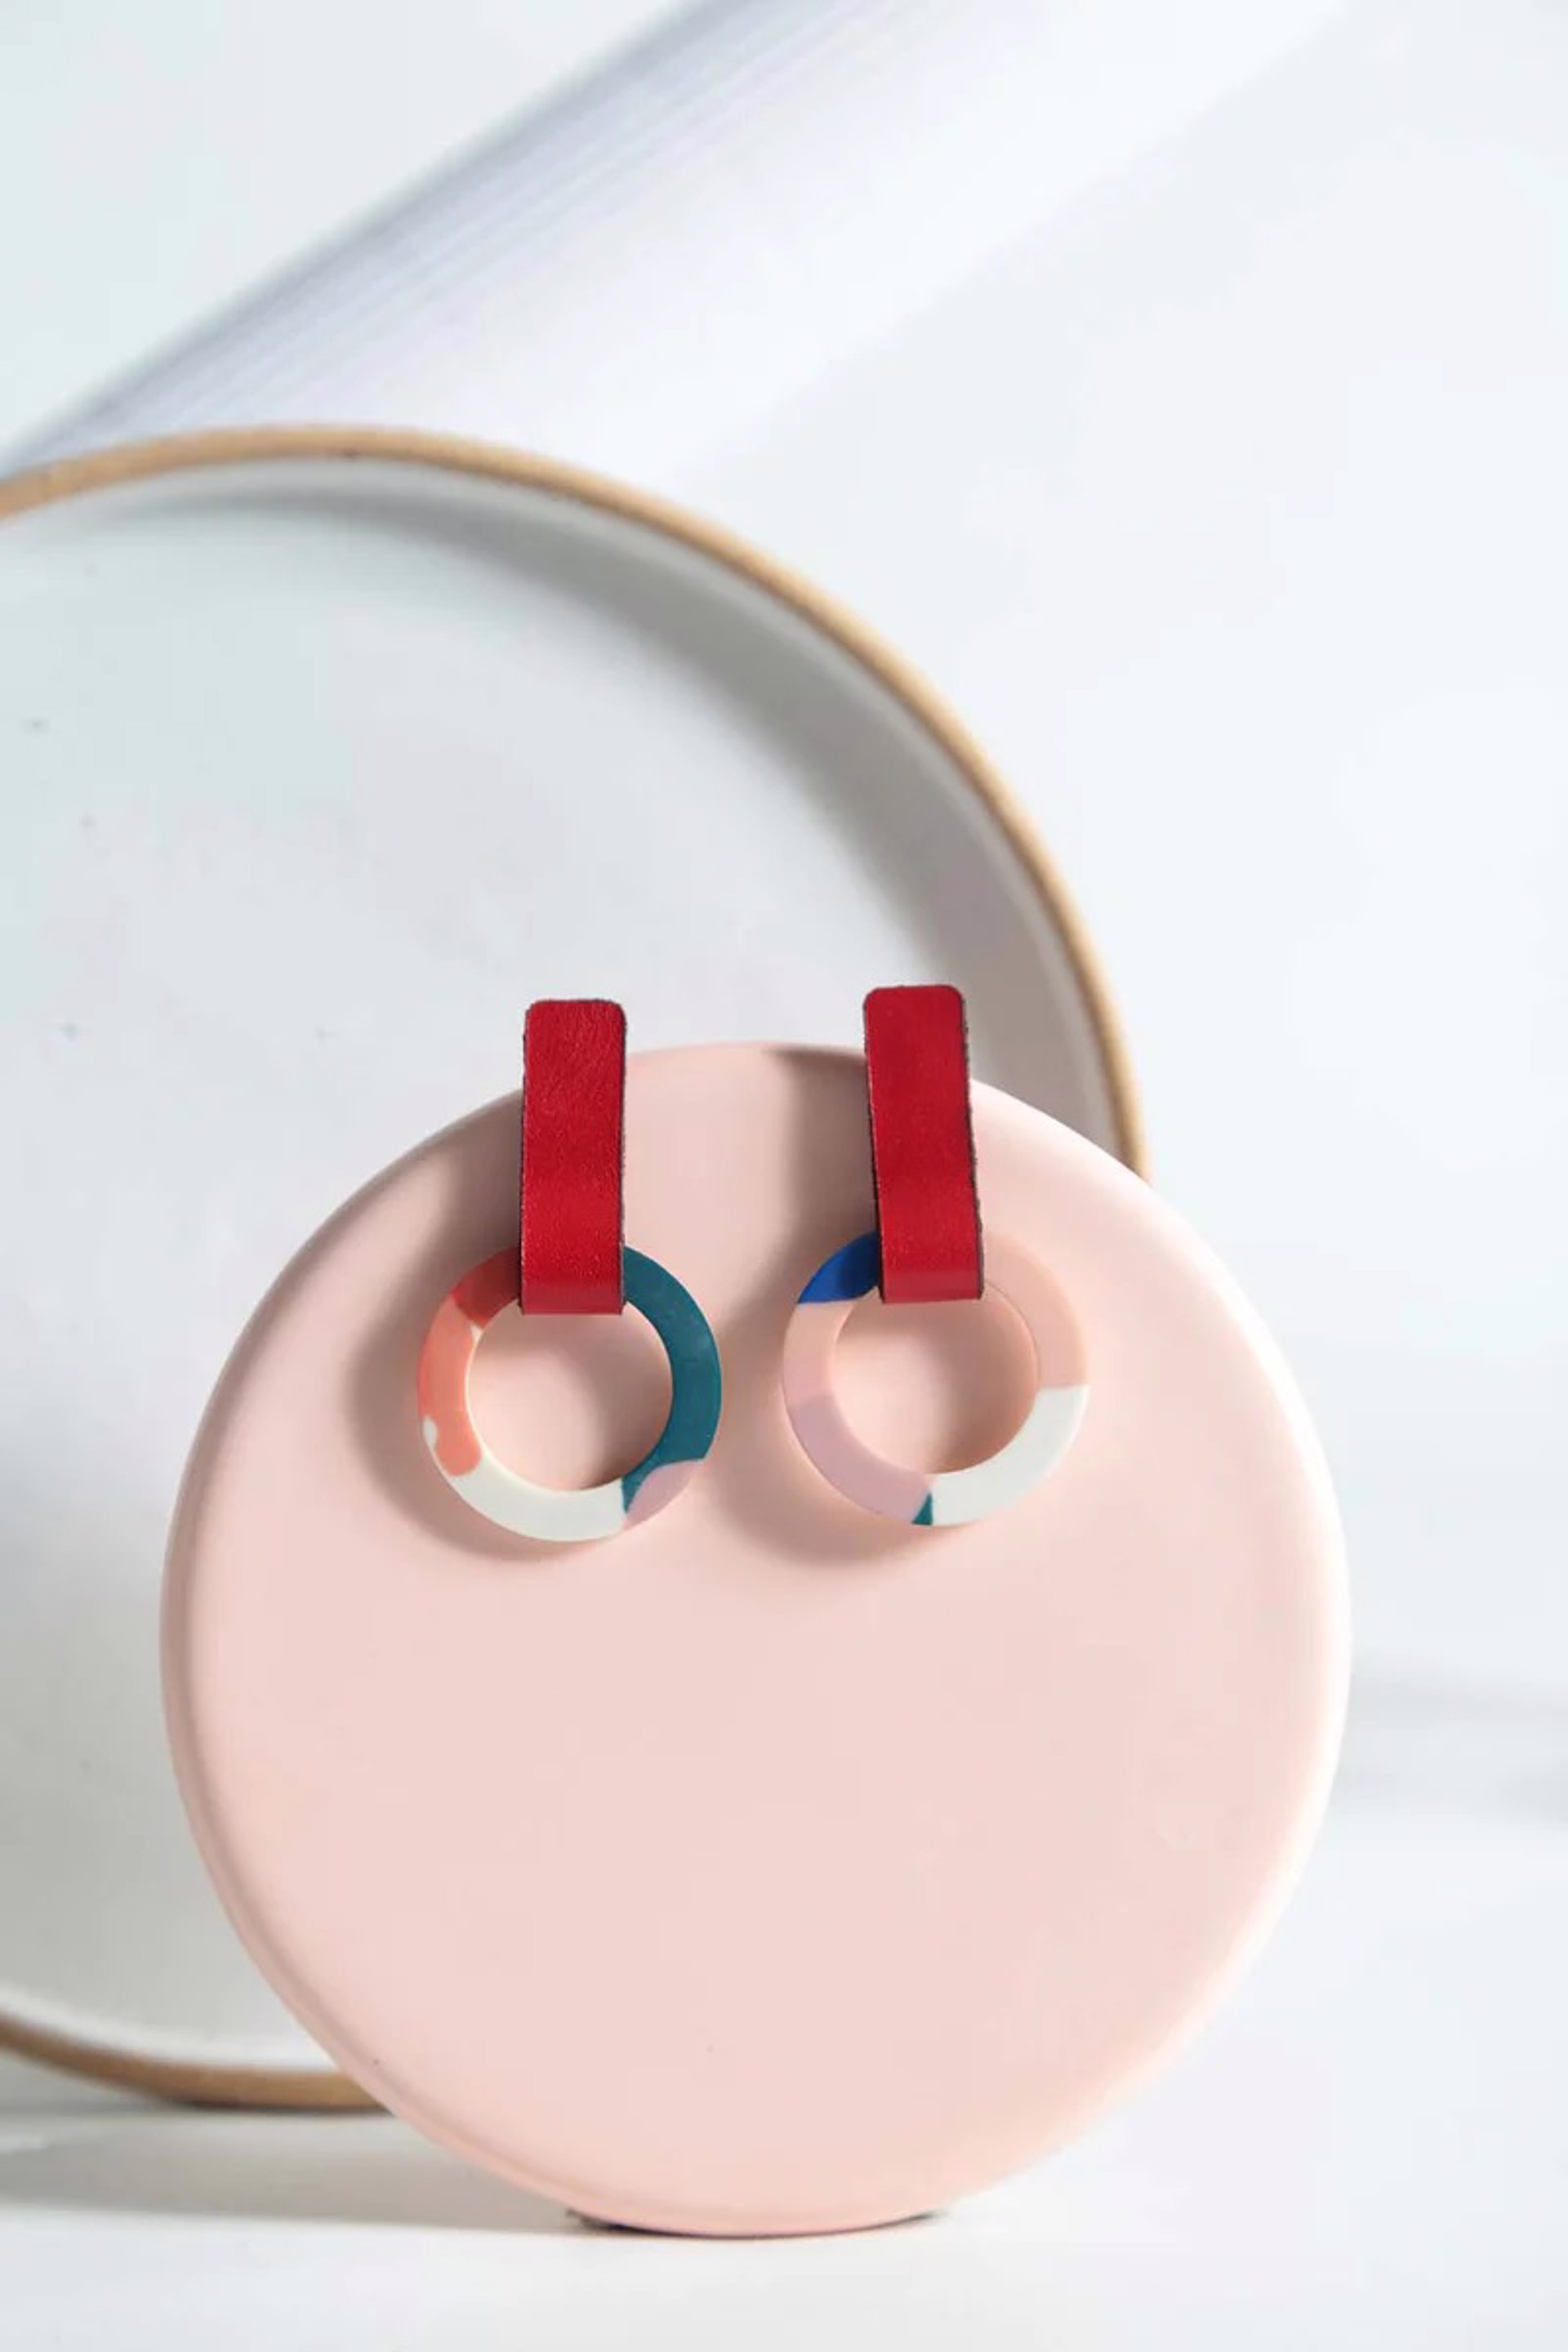 Small Red MS20 Earrings by ISKIN Nikaia Inc.